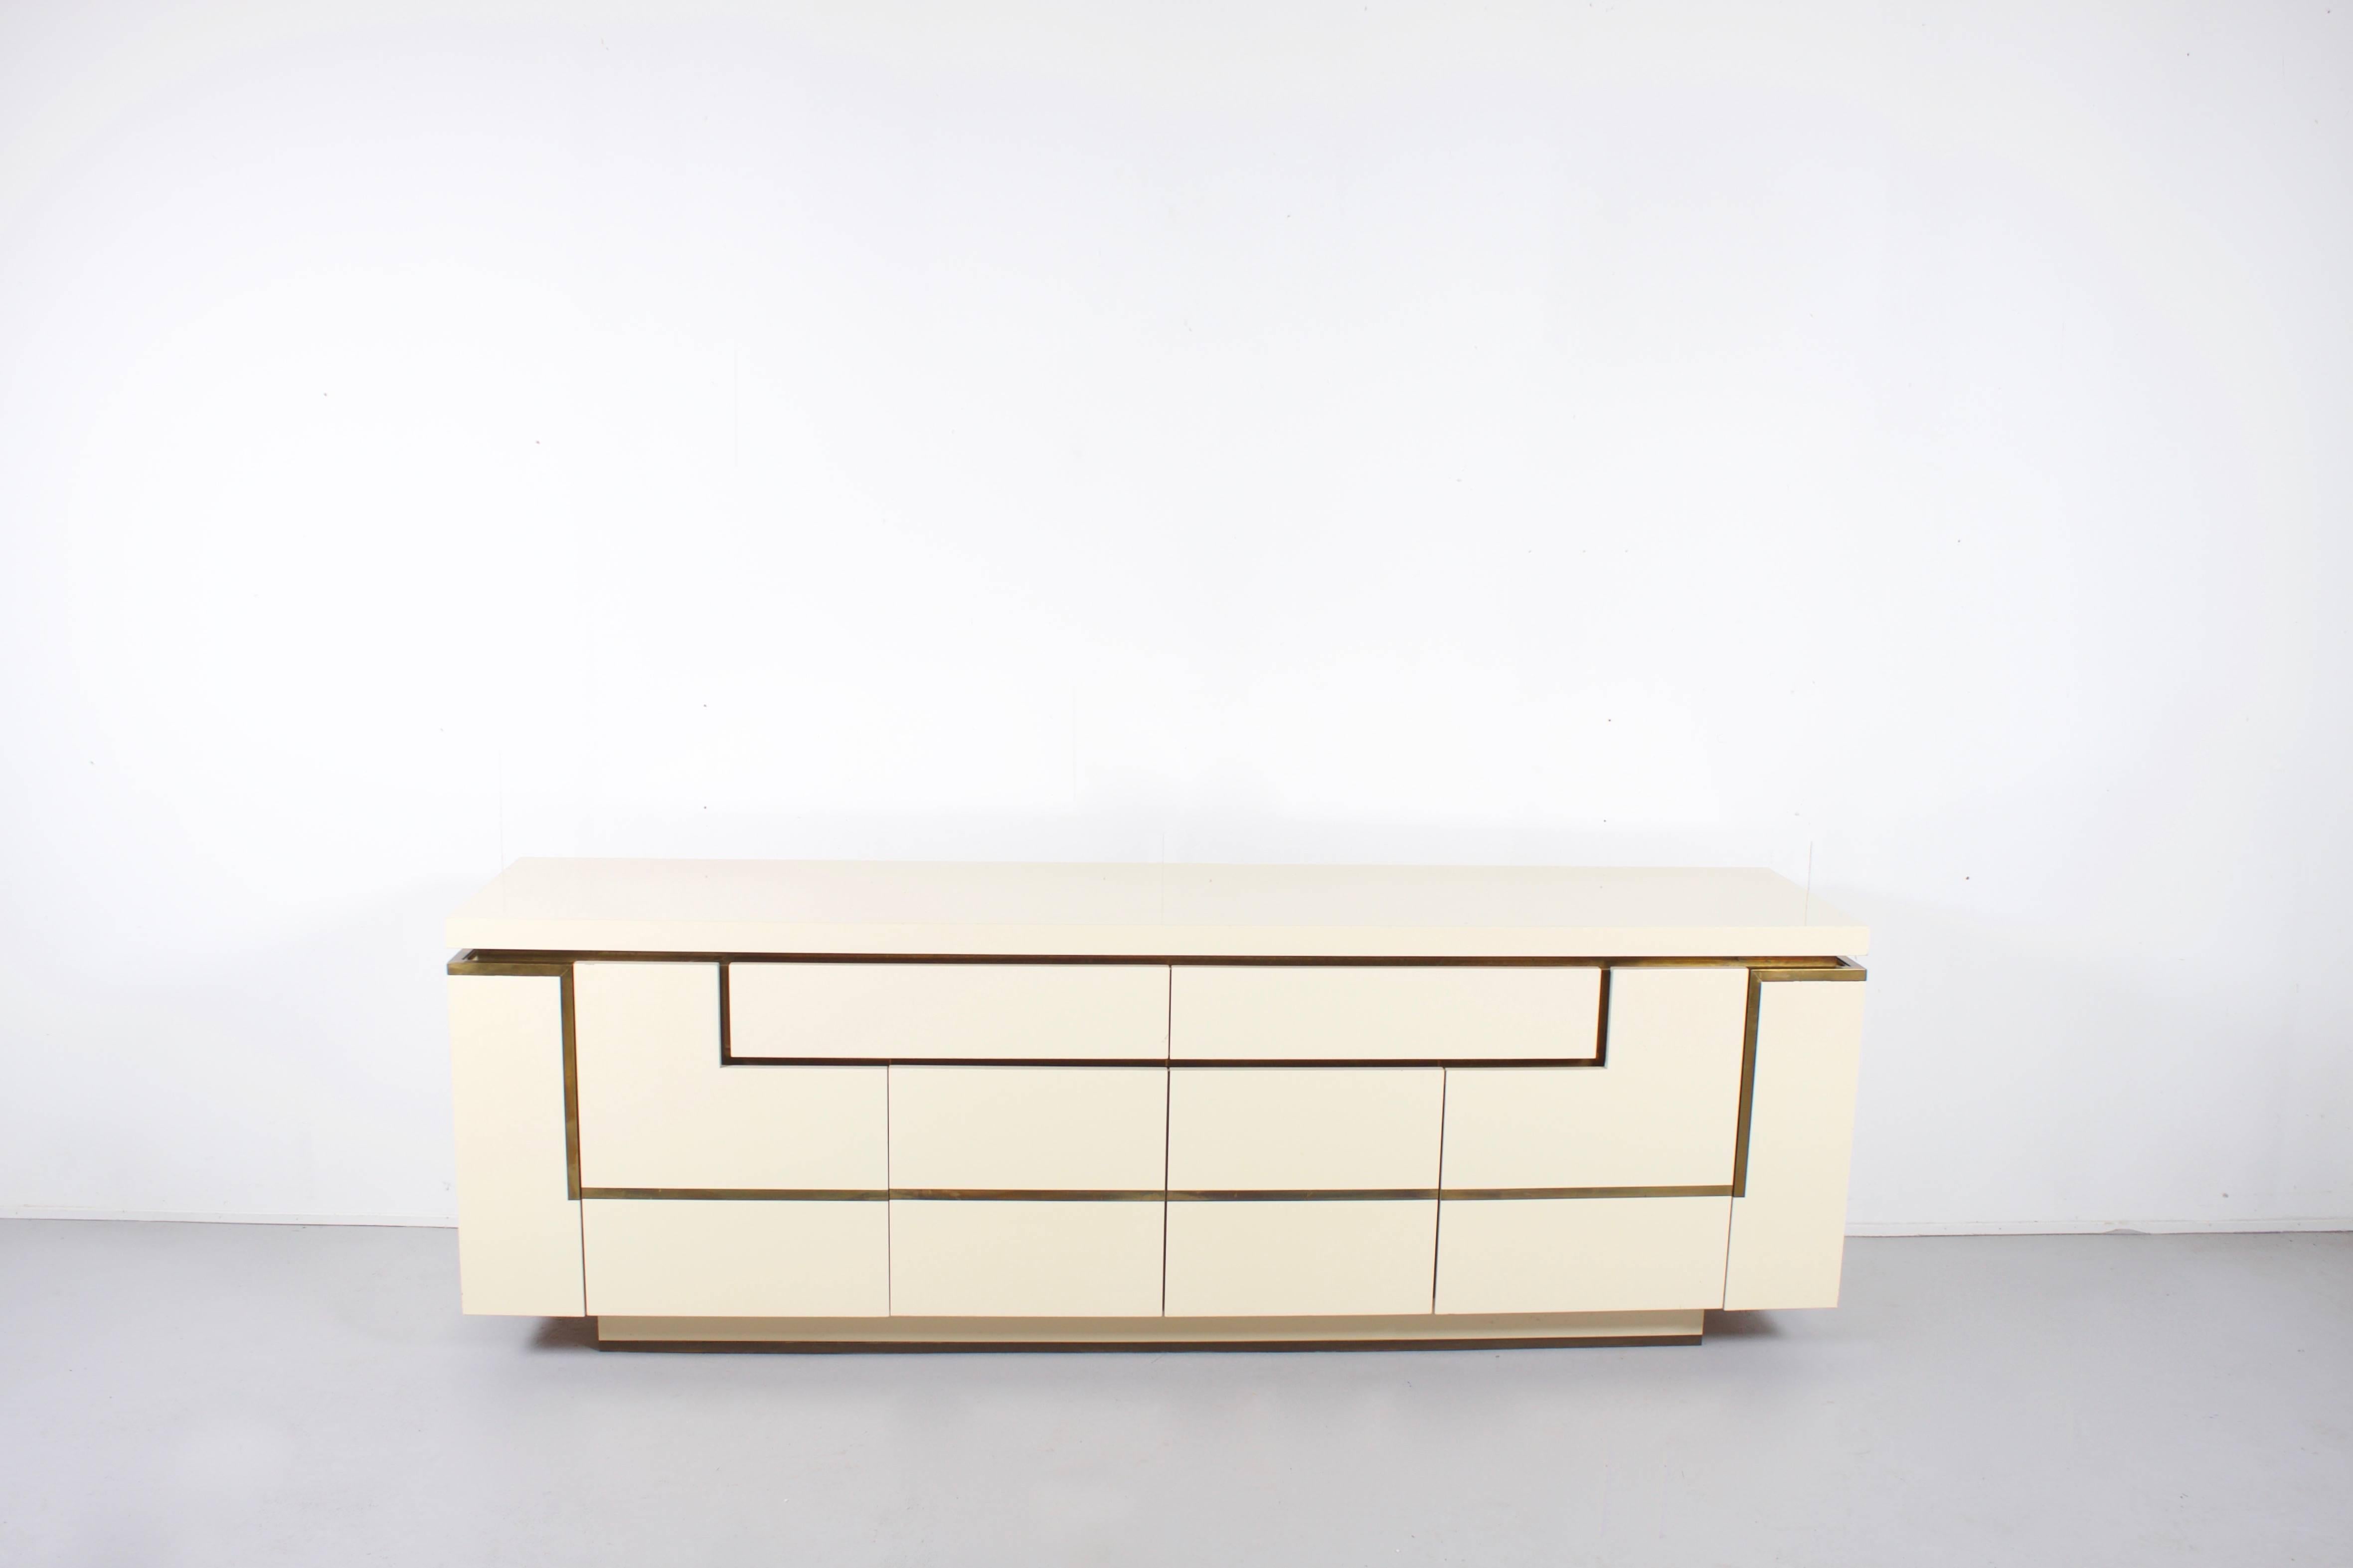 Impressive sideboard by the French designer Jean Claude Mahey in very good condition.

This sideboard is carried out in a beautiful high gloss off-white lacquer and has solid brass trimmed edges.

It has two main compartments with one shelf each,